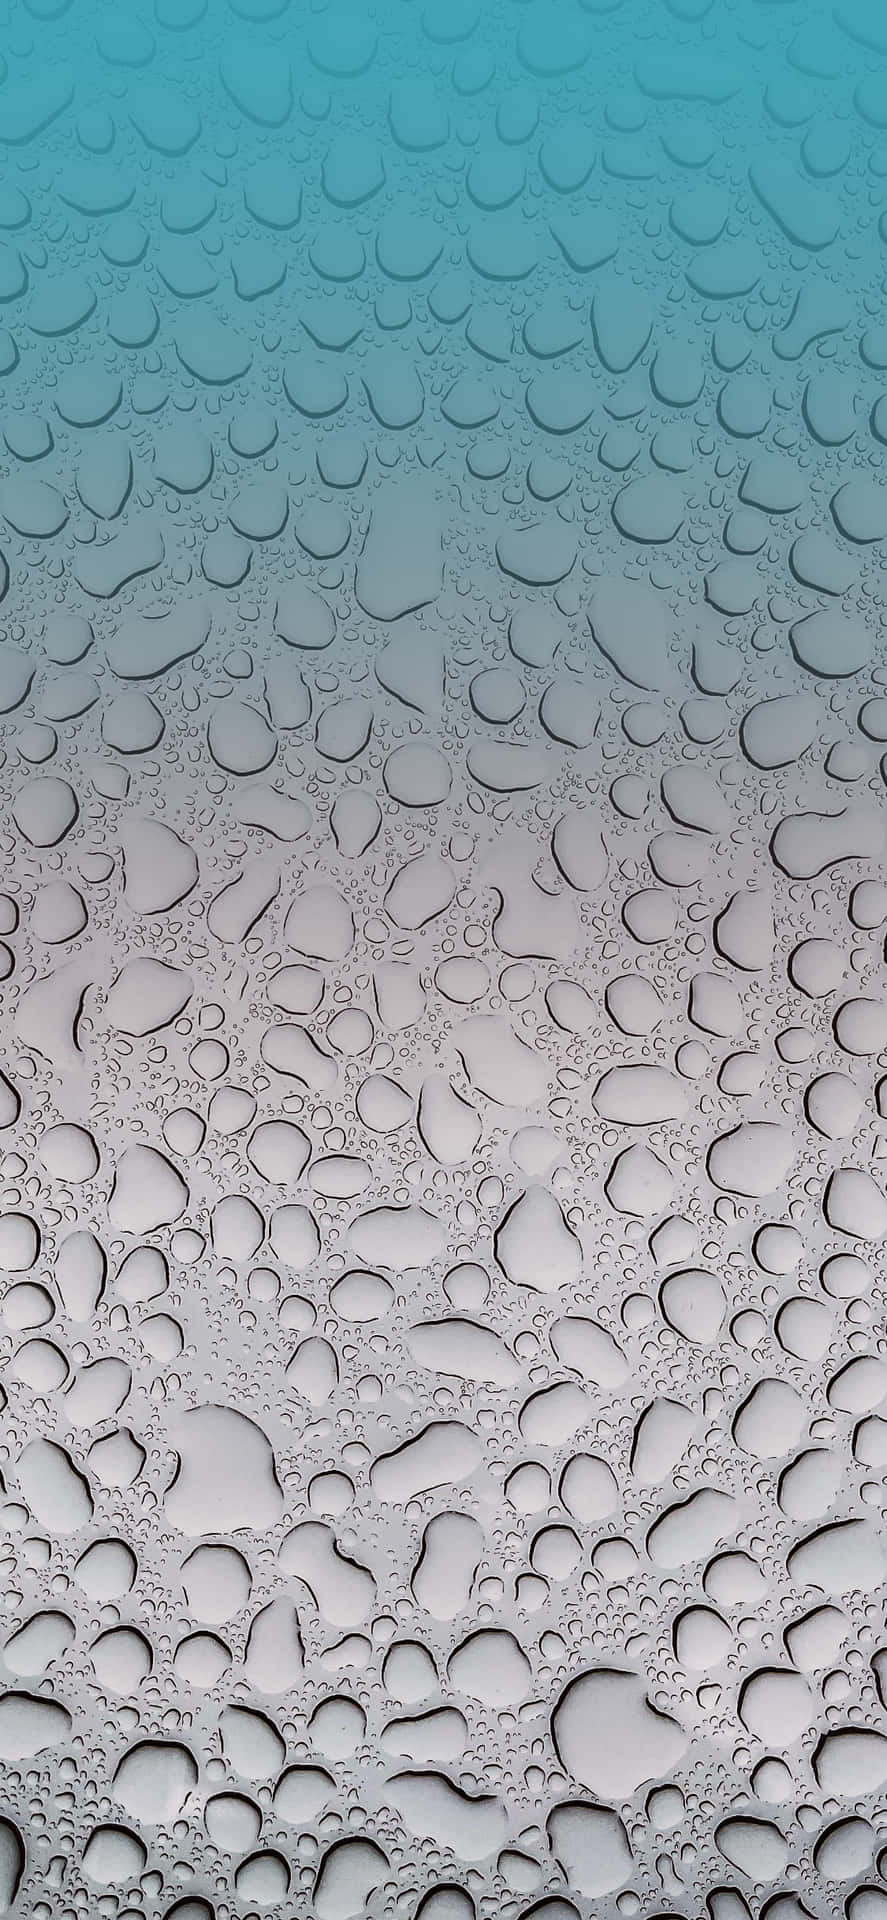 Water Droplets On A Glass Surface Wallpaper